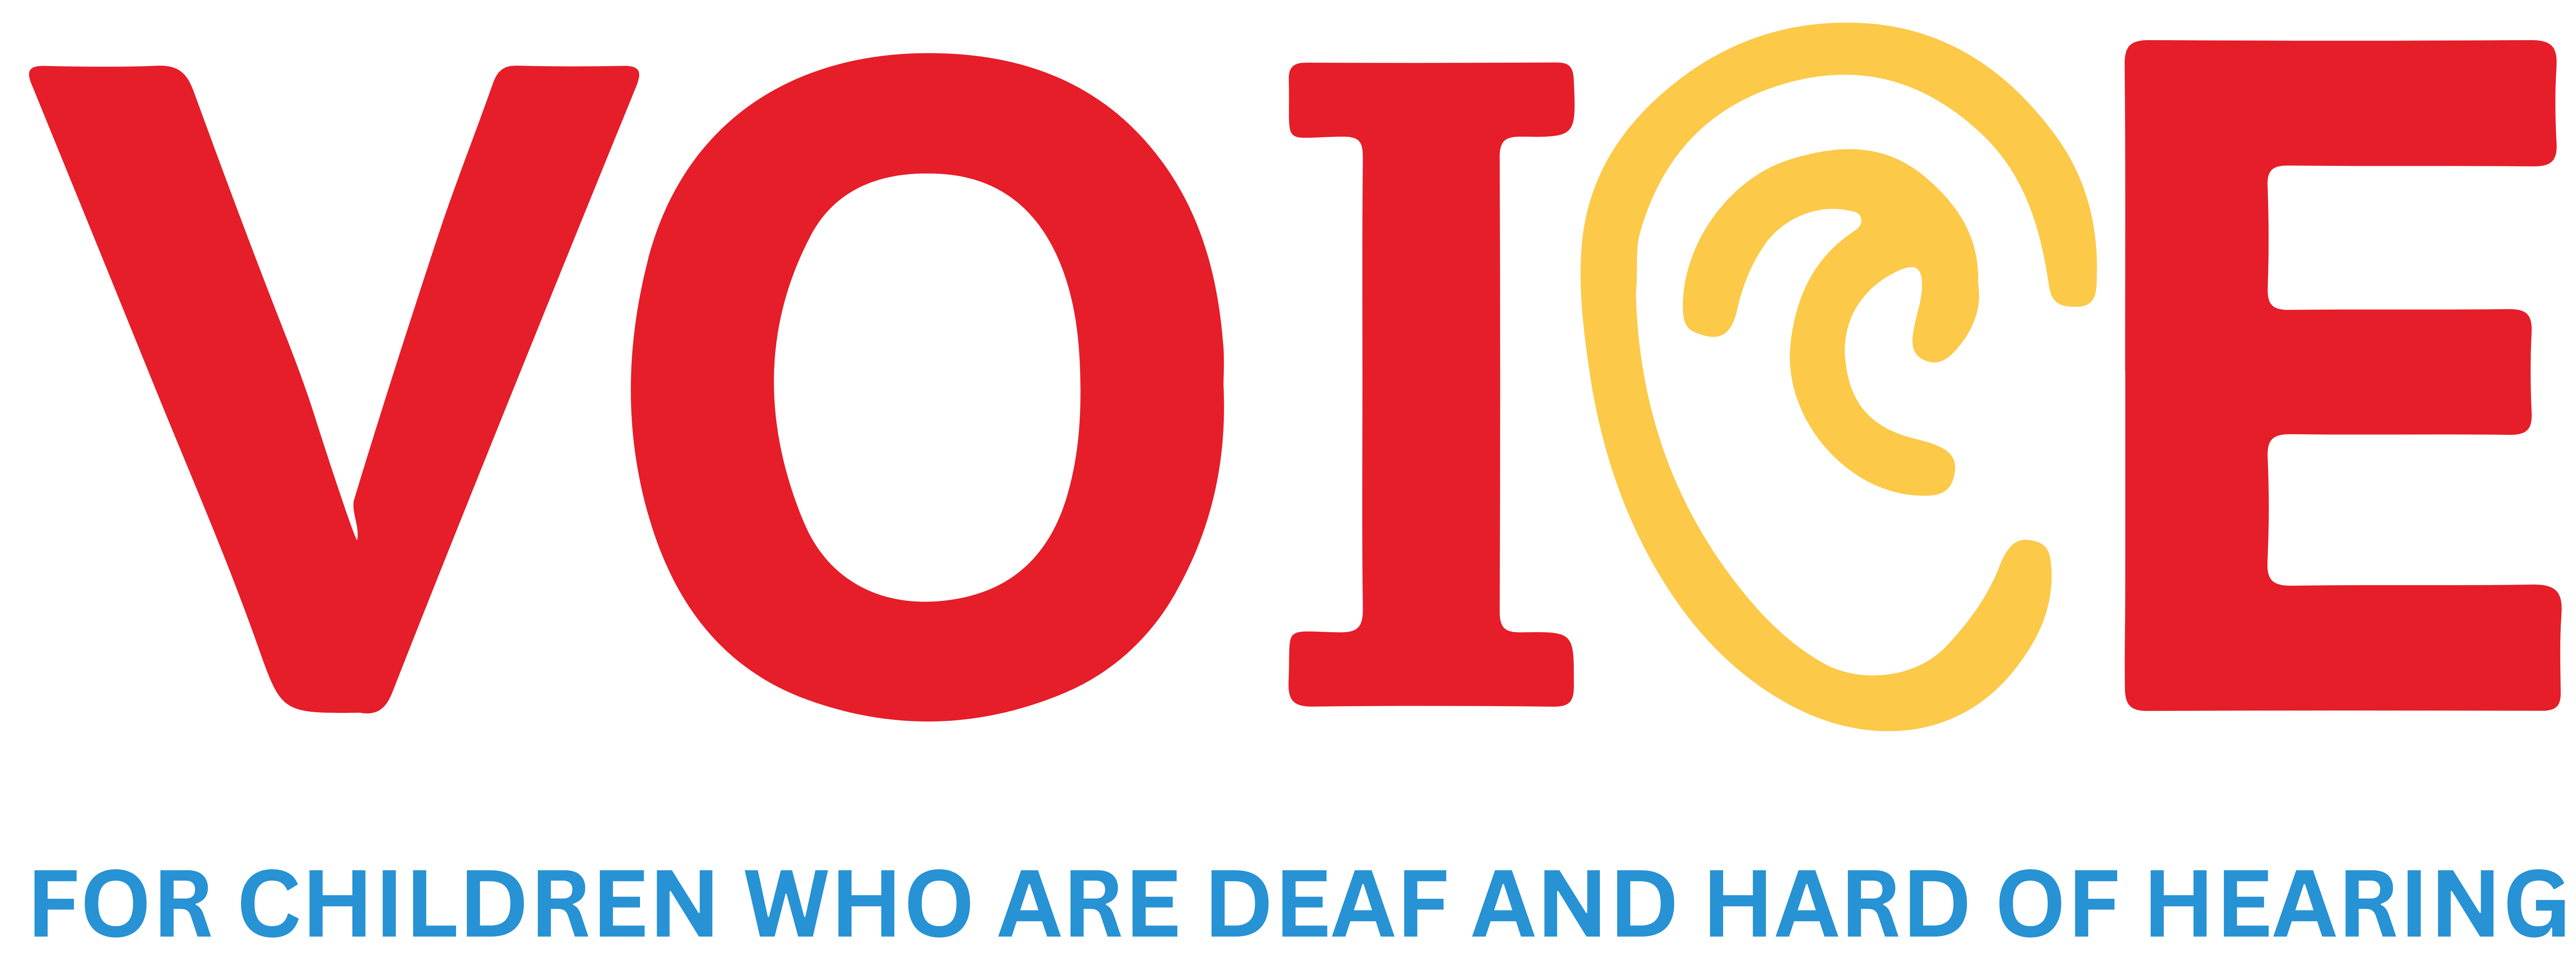 Voice for Deaf and Hard of Hearing Kids logo